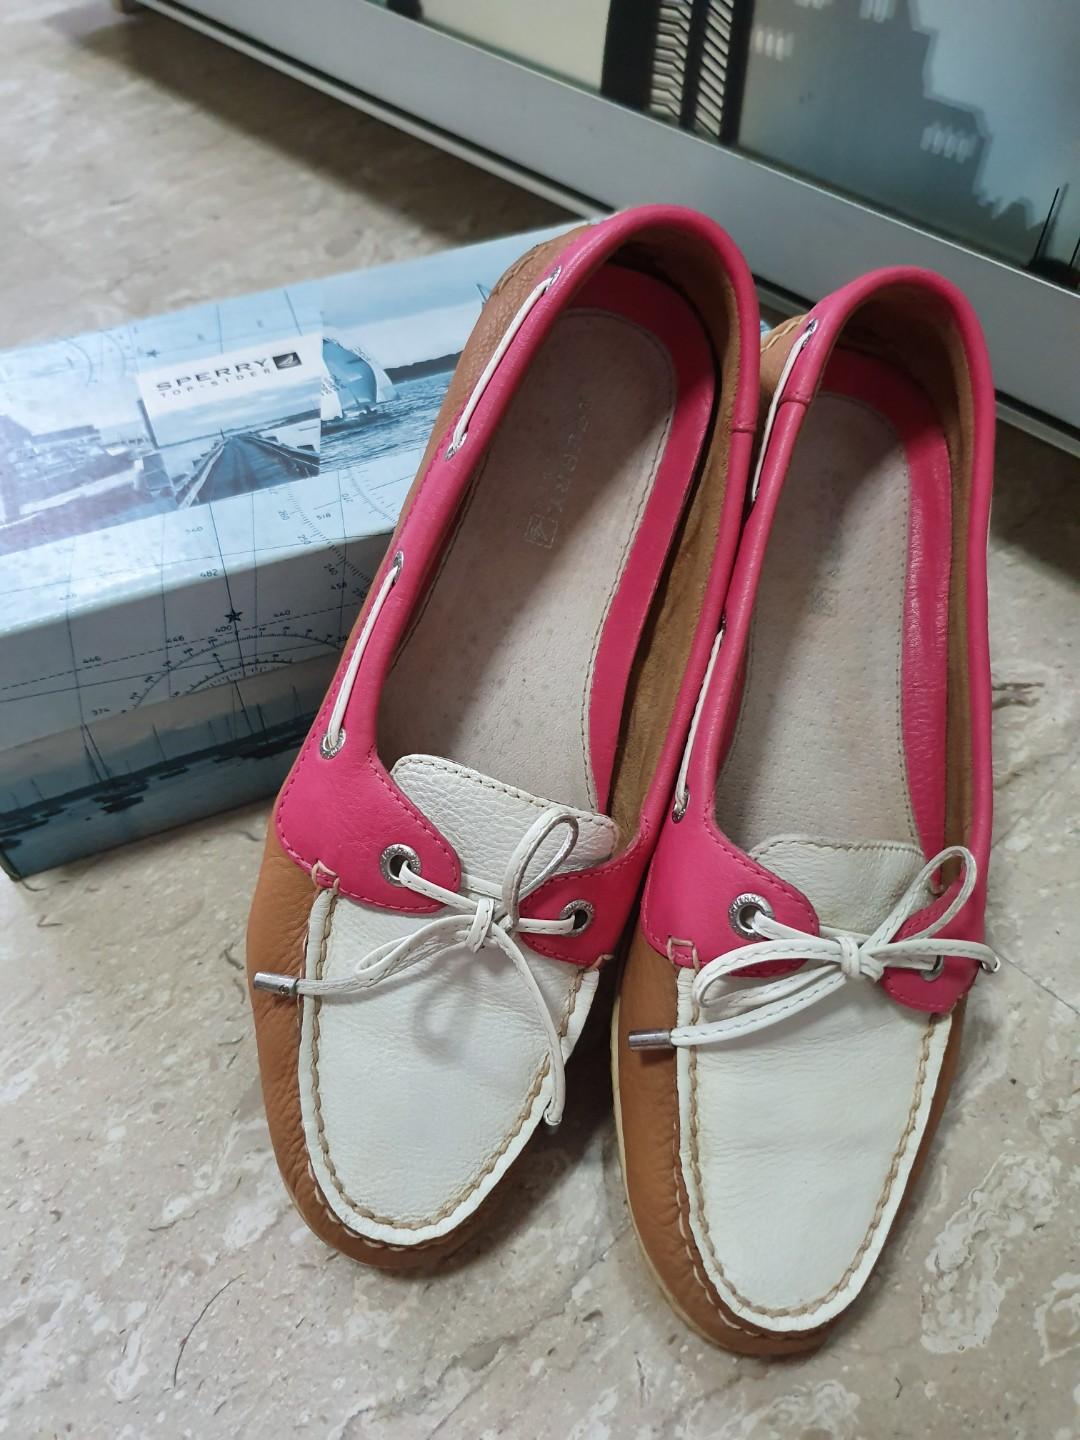 Sperry loafers sneakers shoes heels 